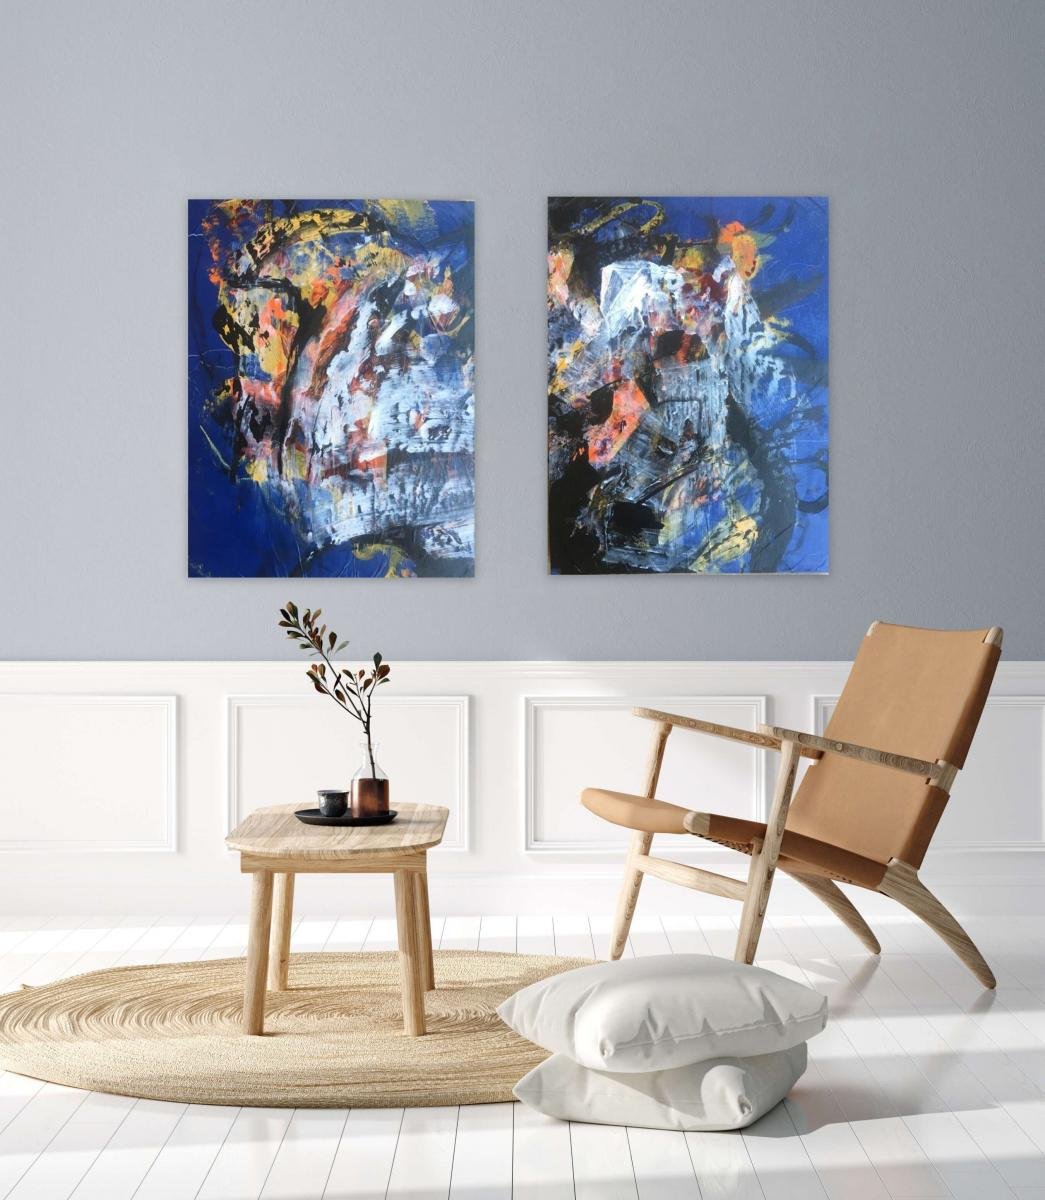 Abstracts in Blue, with chair and pillows.jpeg